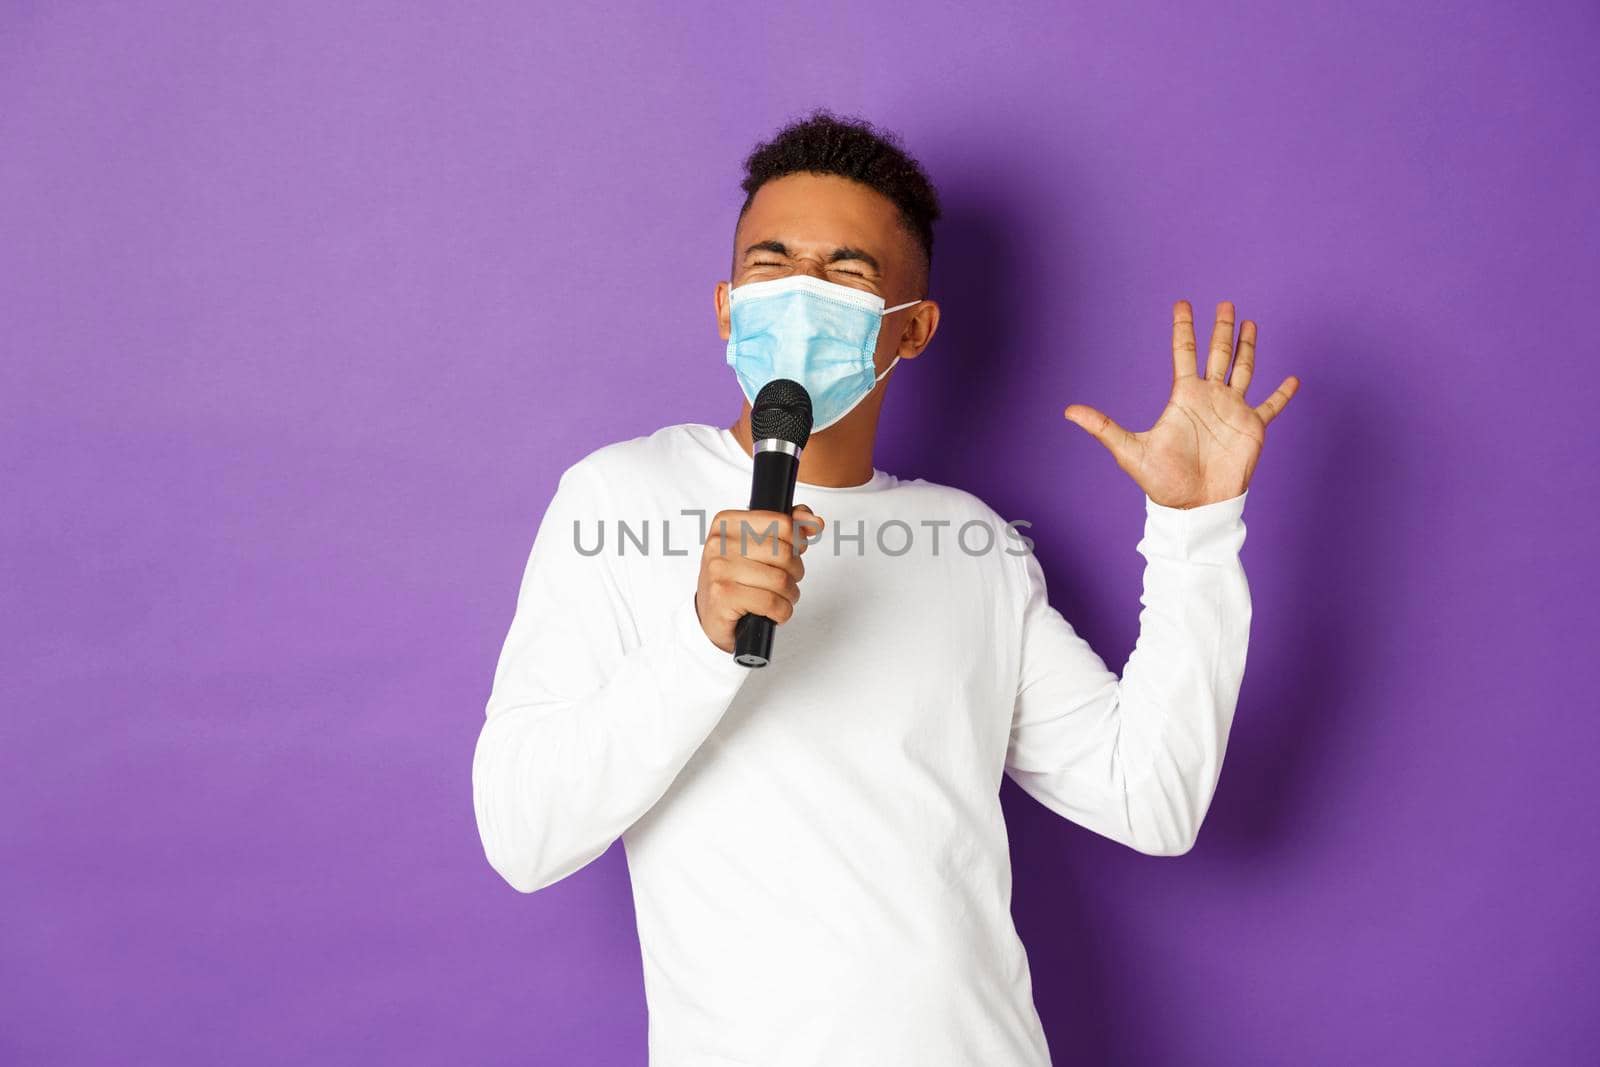 Concept of covid-19, pandemic and social distancing. Cheerful african-american guy having fun at karaoke, wearing medical mask and singing in microphone, standing over purple background.